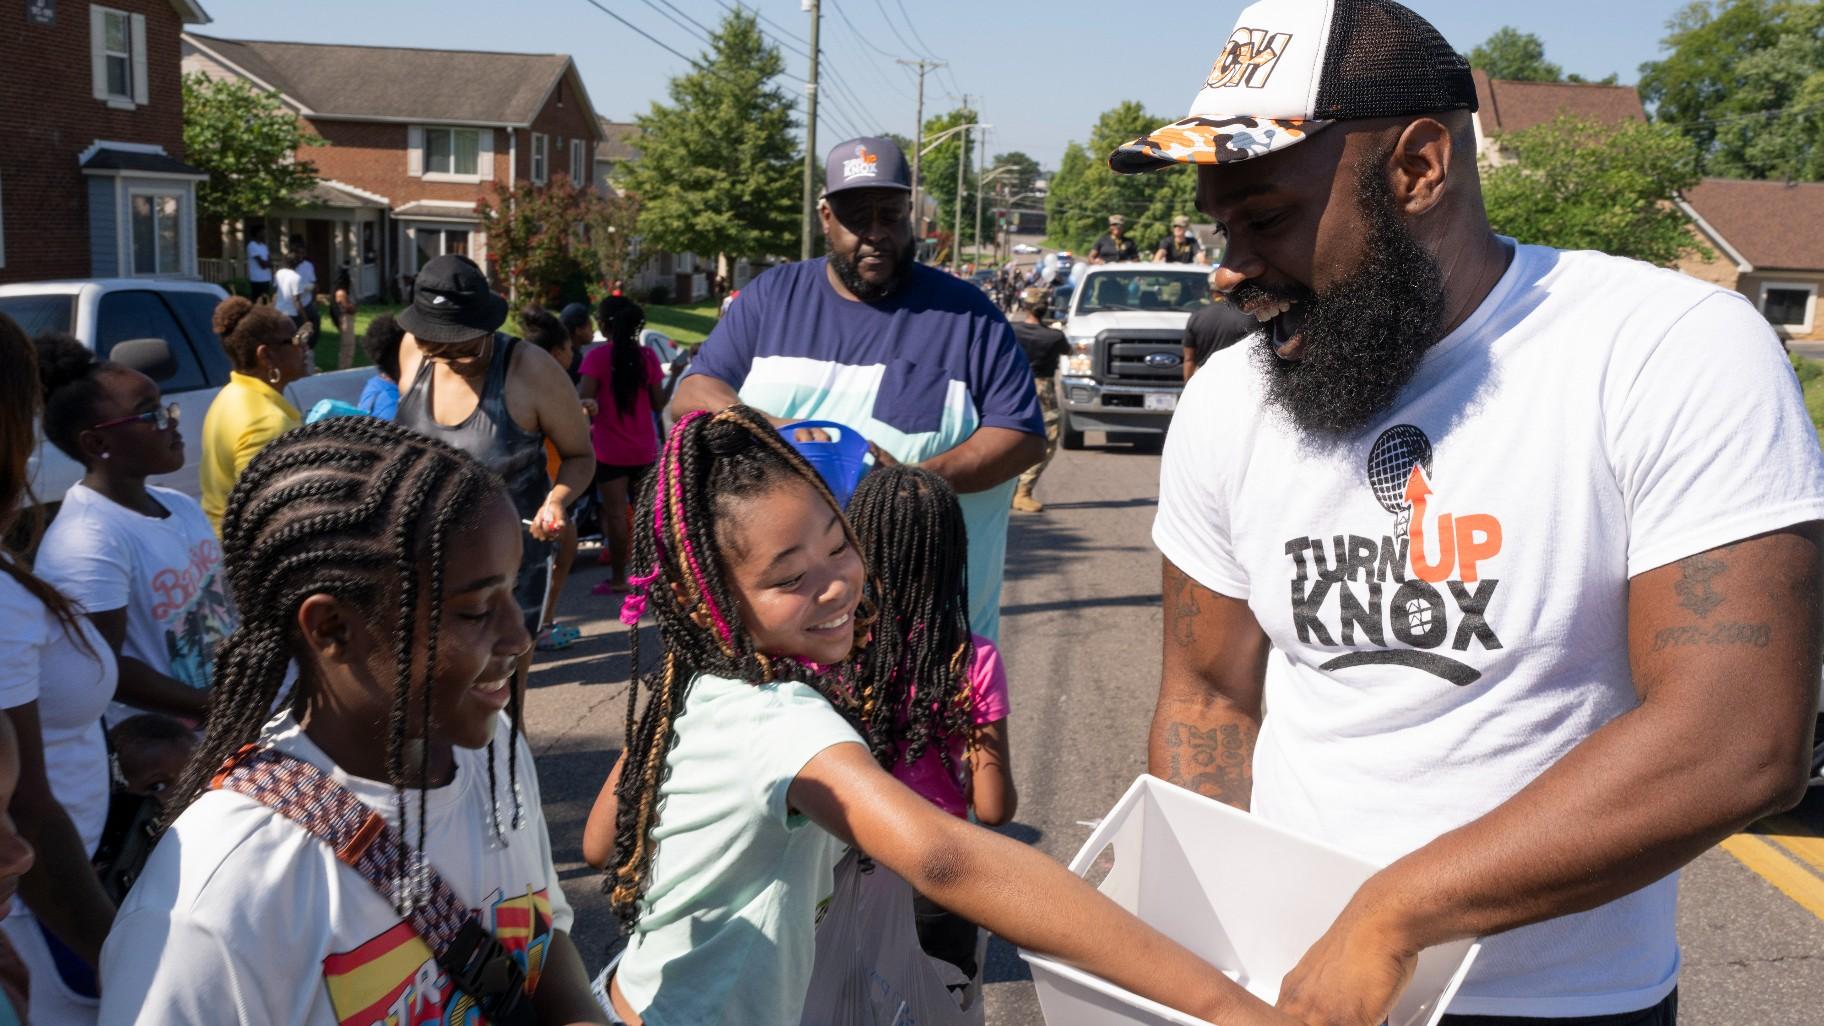 Quientest Vinson, right, of Turn Up Knox hands out candy to children during the Lonsdale Neighborhood Homecoming celebration Saturday, Aug. 5, 2023 in Knoxville, Tenn. (AP Photo / George Walker IV)